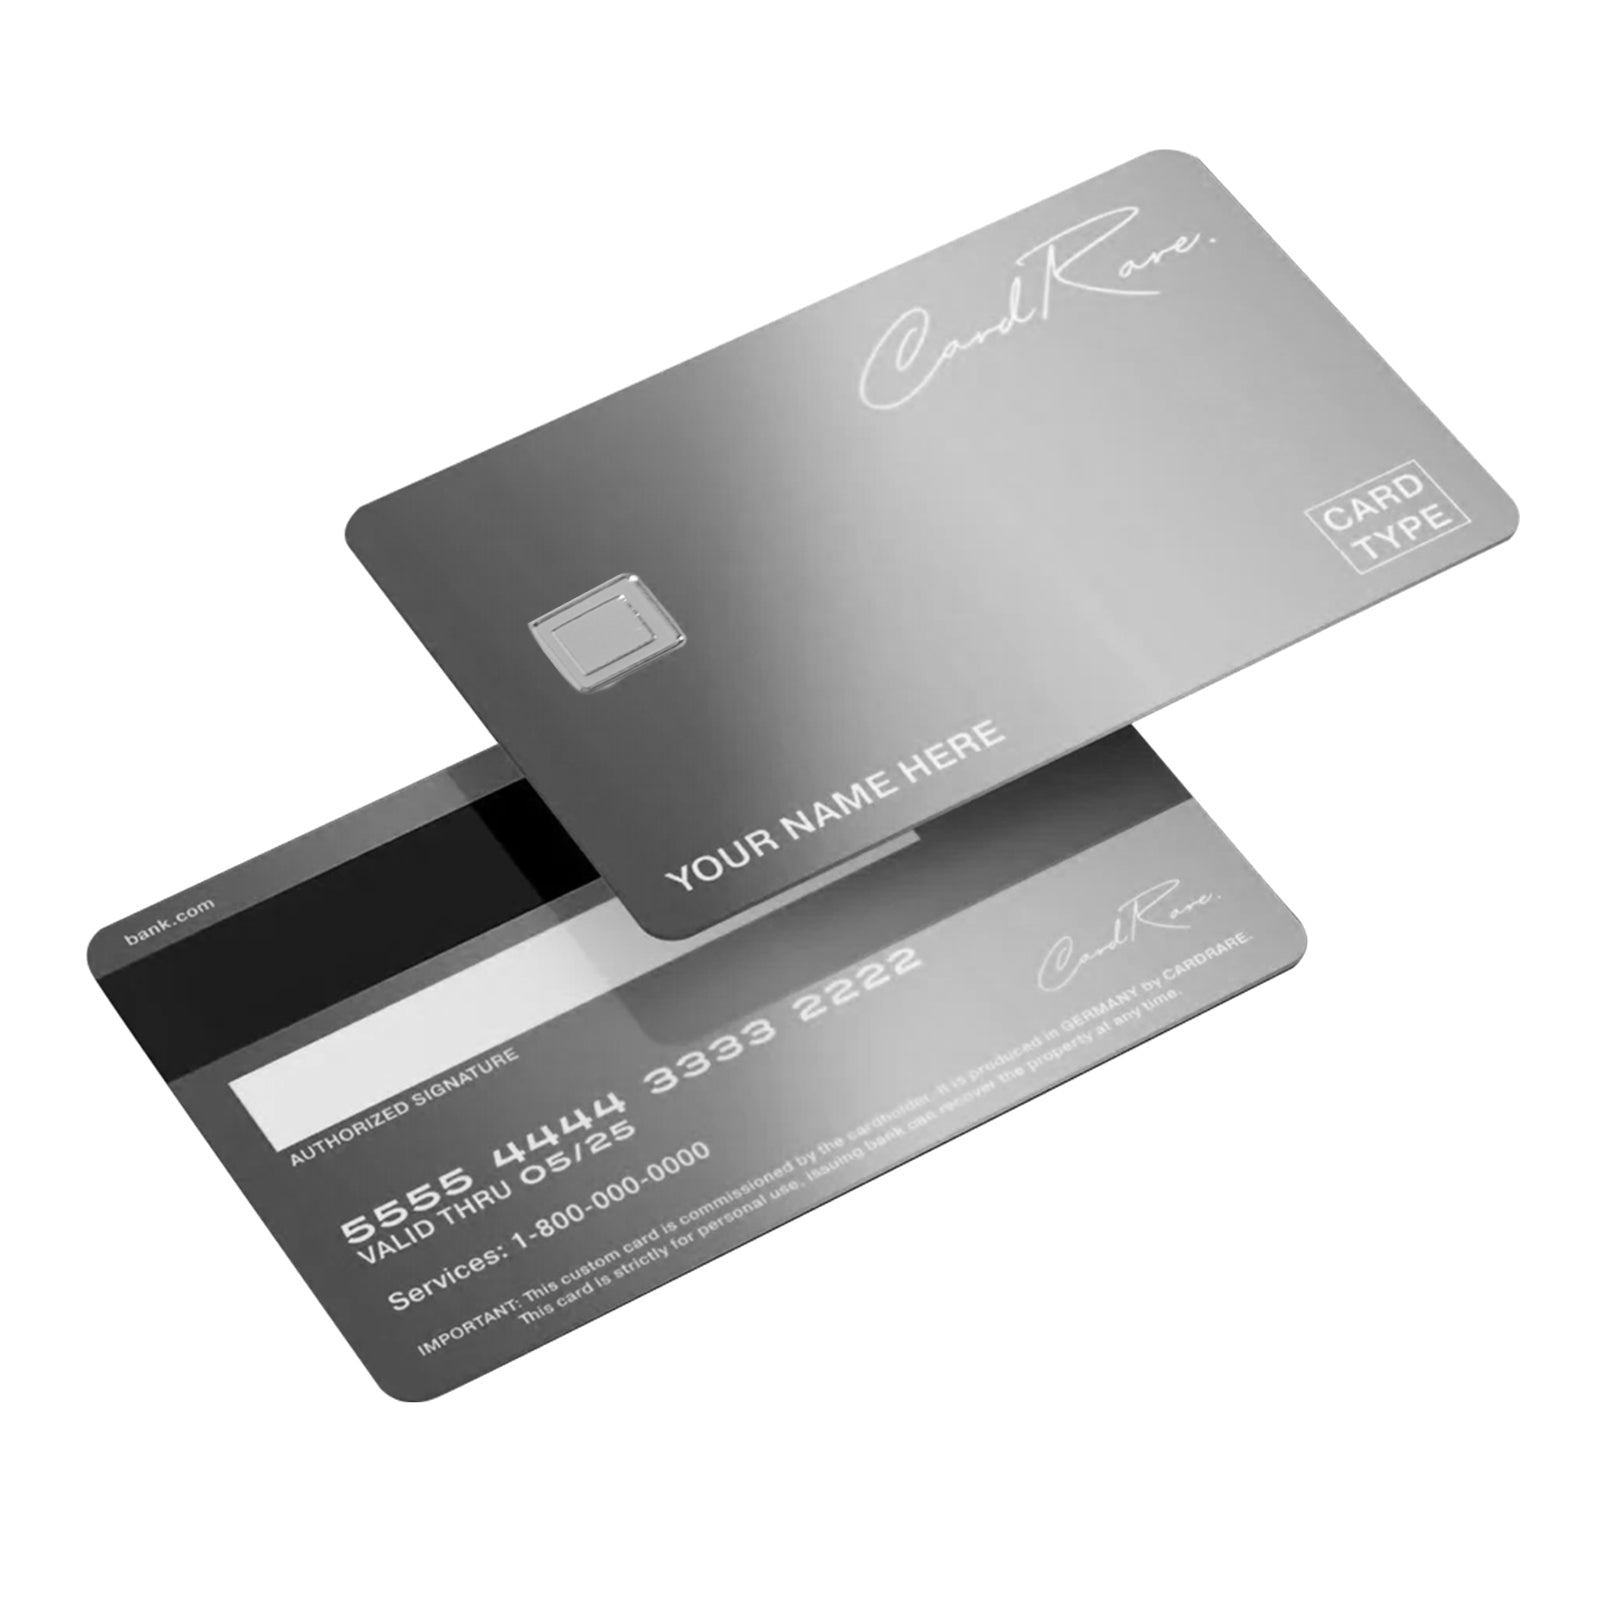 2pcs Stainless Steel/Brass Matte Metal Credit Card Blank DIY 4442 Chip Slot with HiCo 3 Track Magnetic Stripe - CREATORALLY